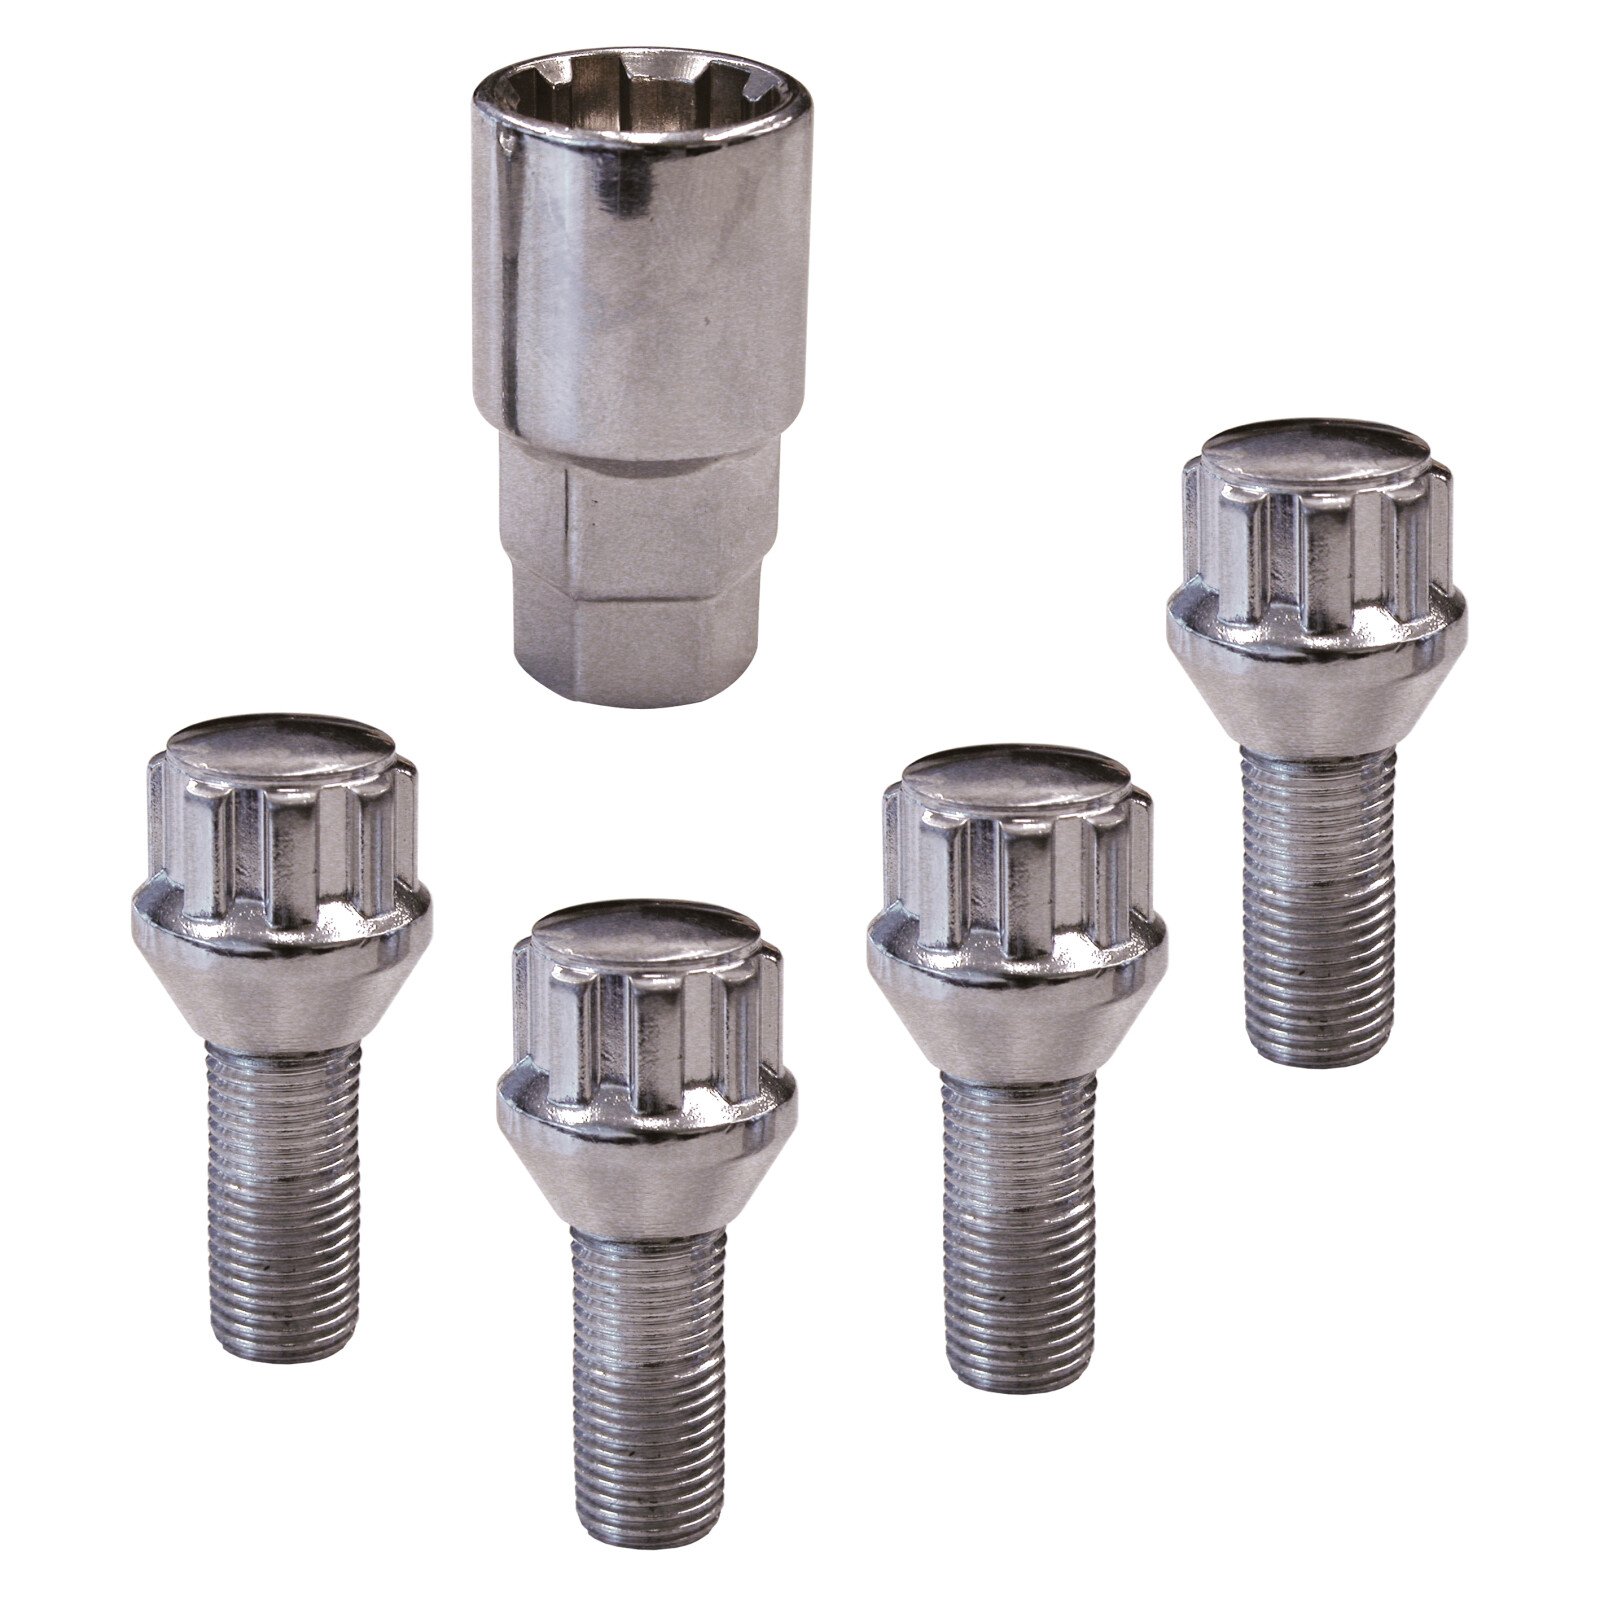 Anti-theft wheel bolts kit 4 pcs conical - Type G - Resealed thumb